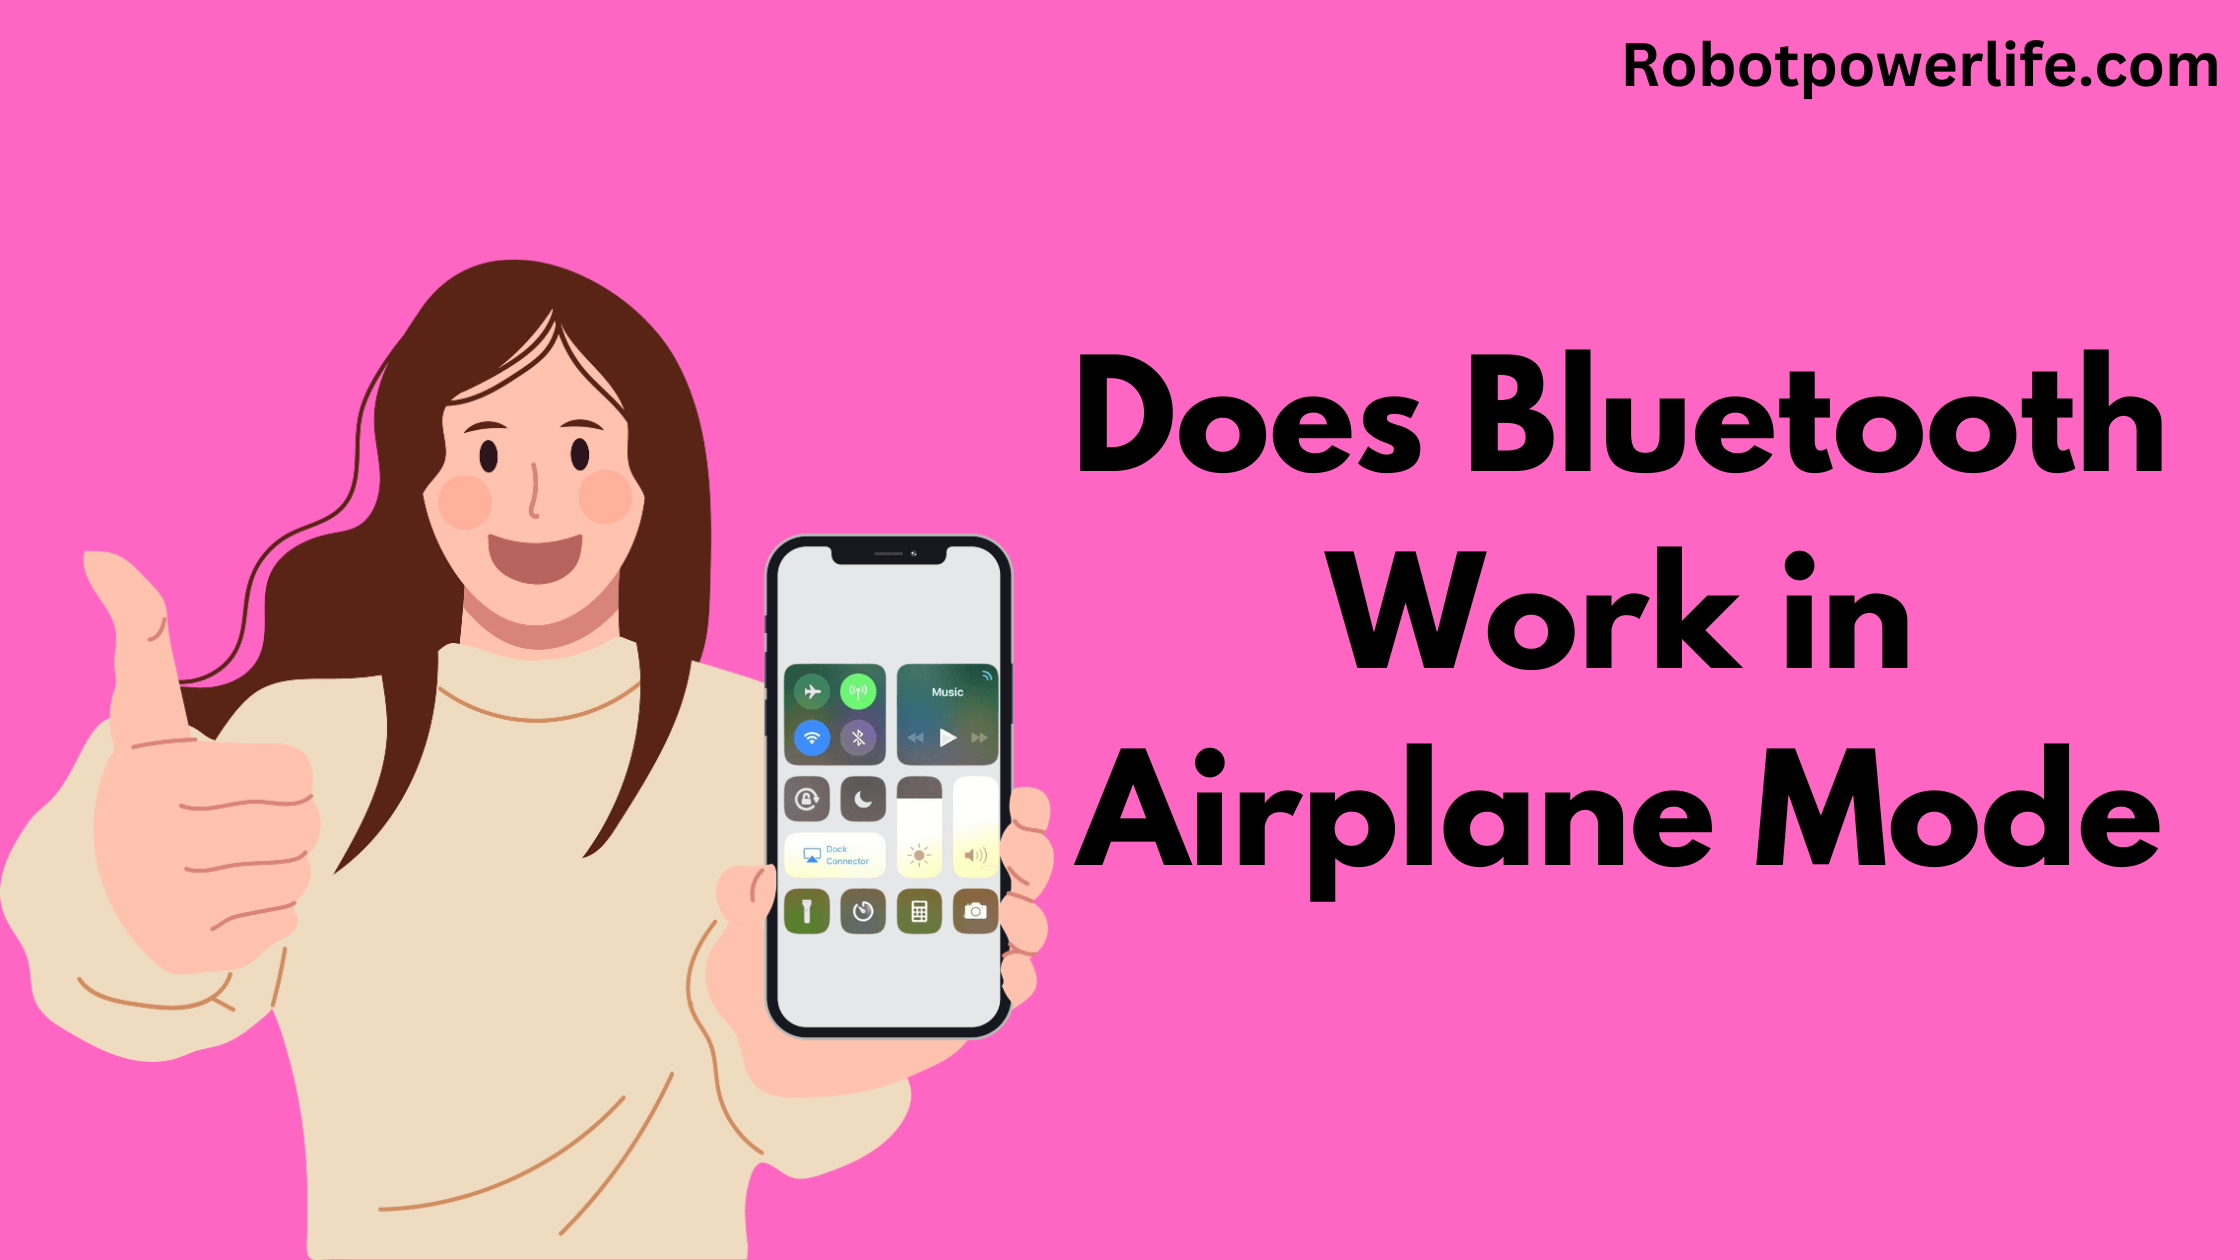 Does Bluetooth Work in Airplane Mode